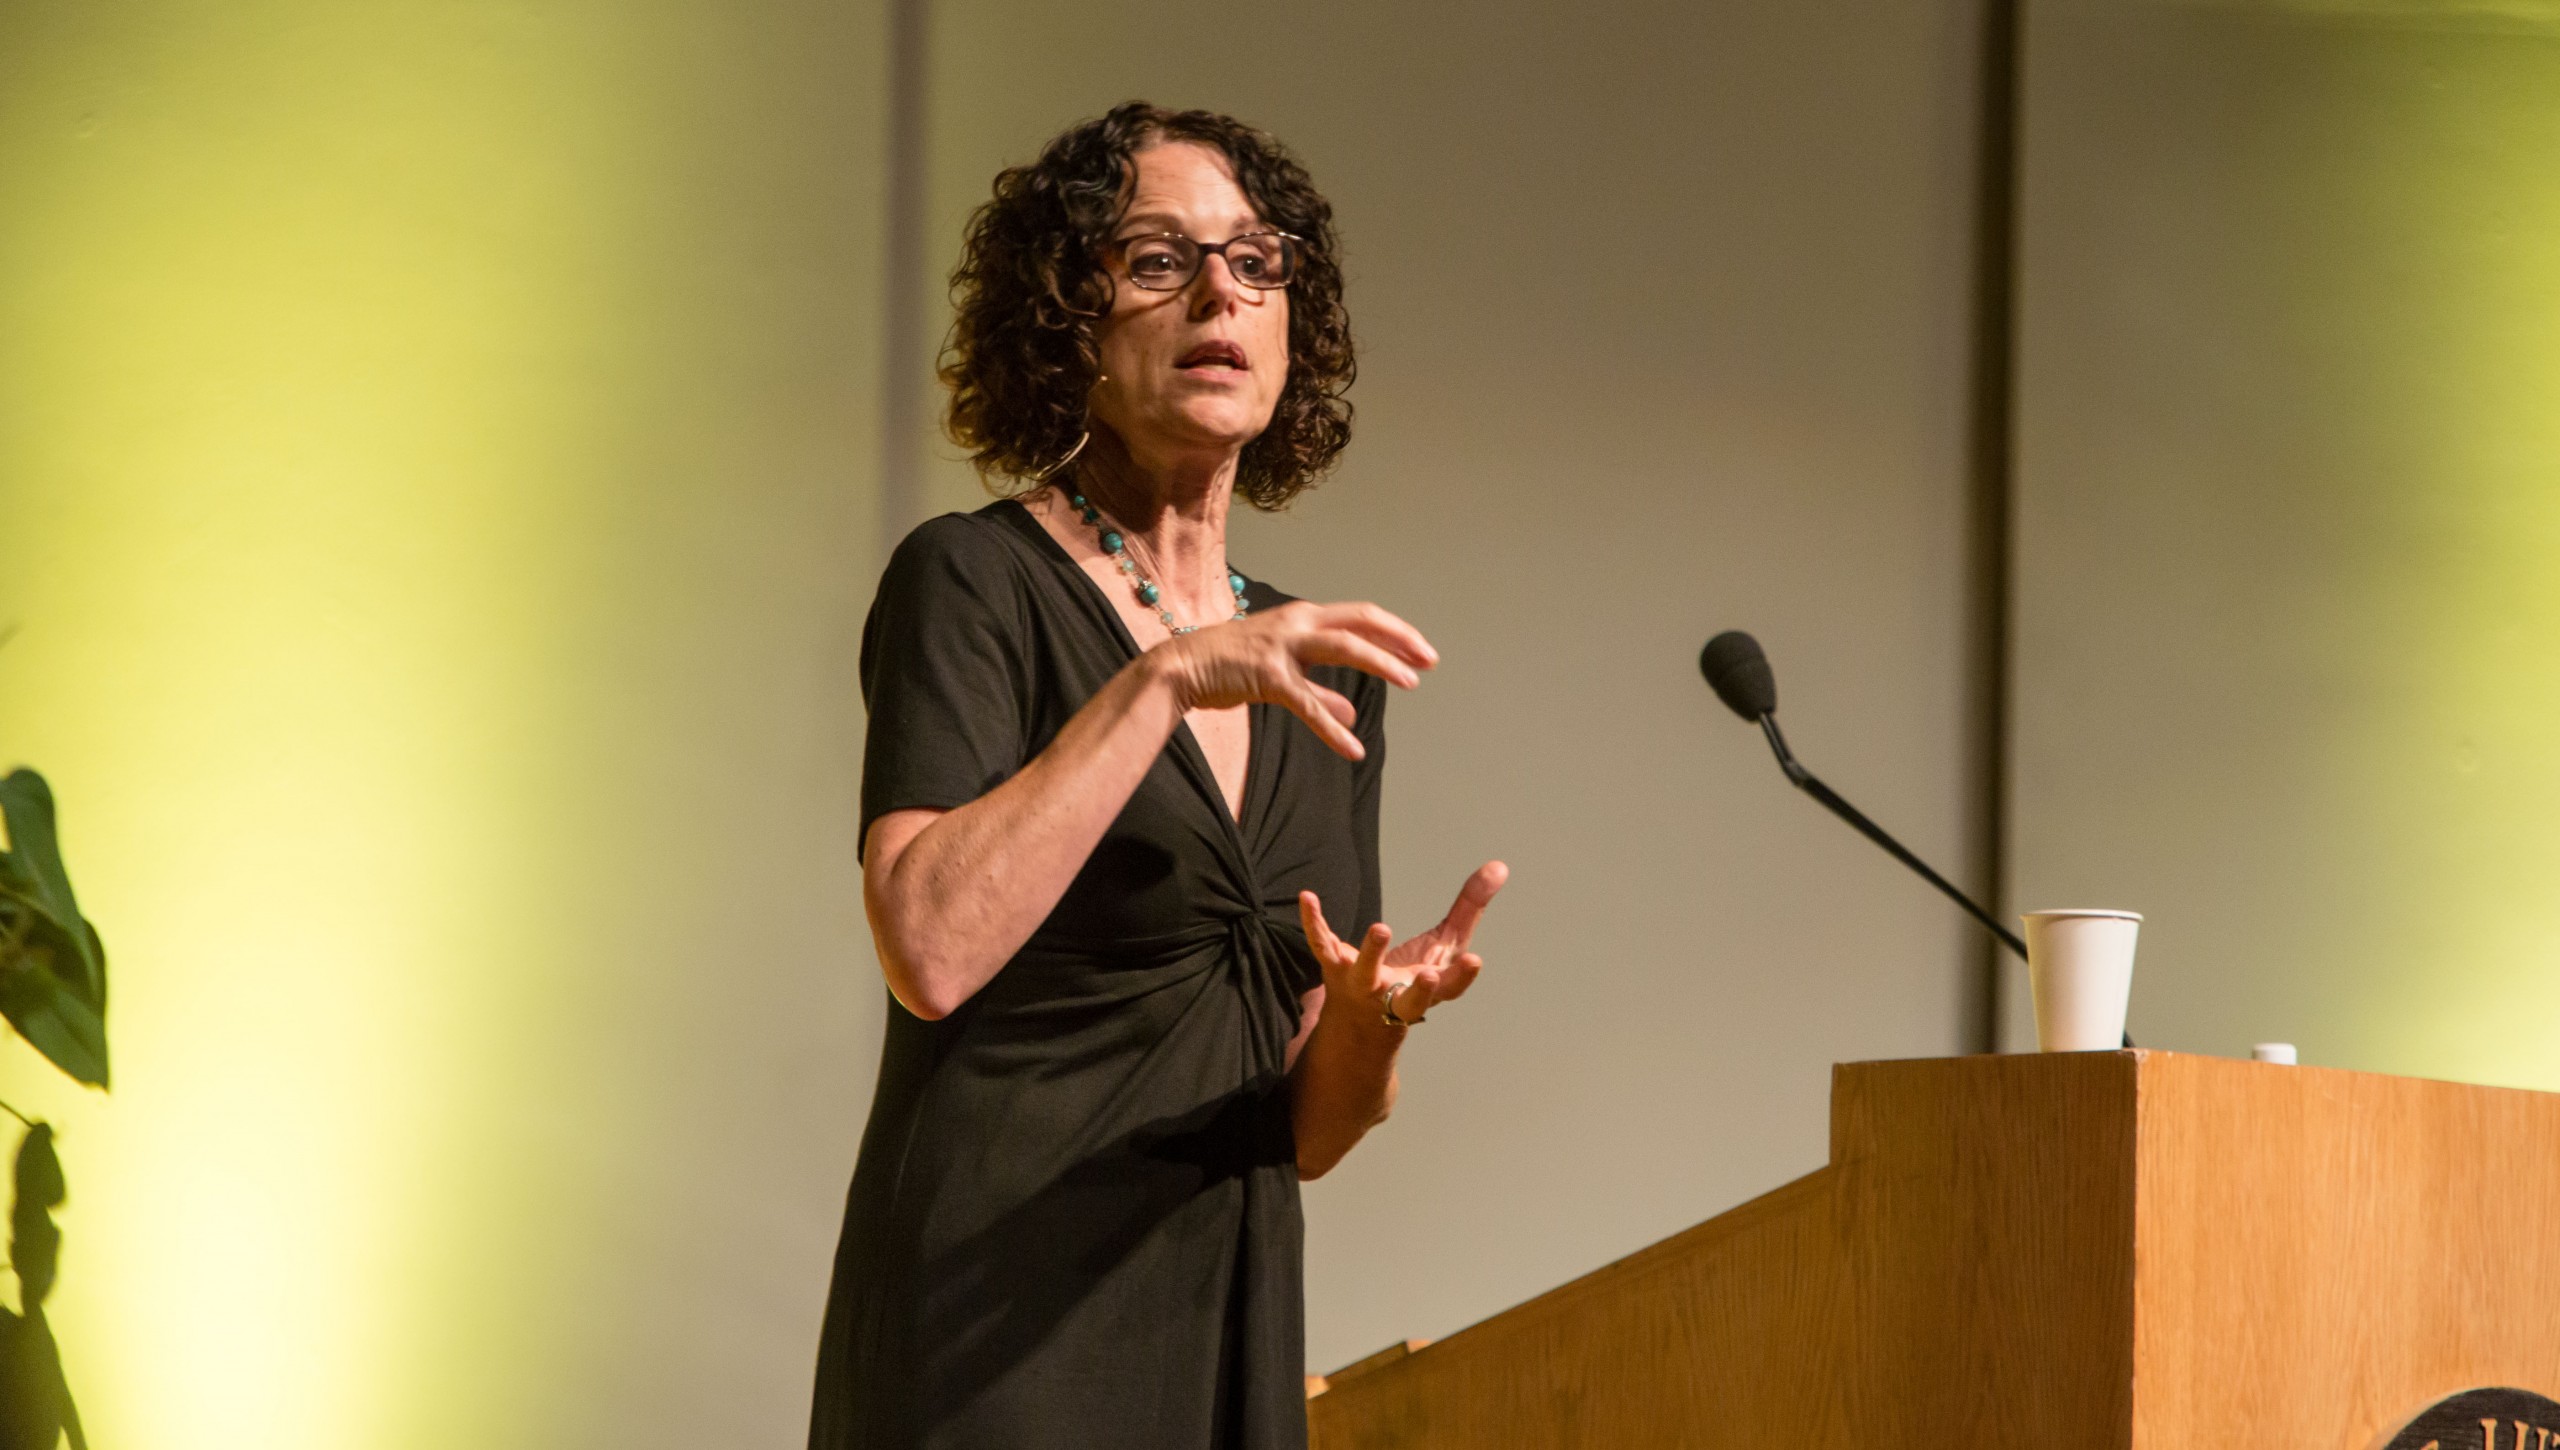 Robin DiAngelo, Ph.D., presents at Univsersity Conference on Wednesday, Aug. 31. (Photo: John Froschauer/PLU)